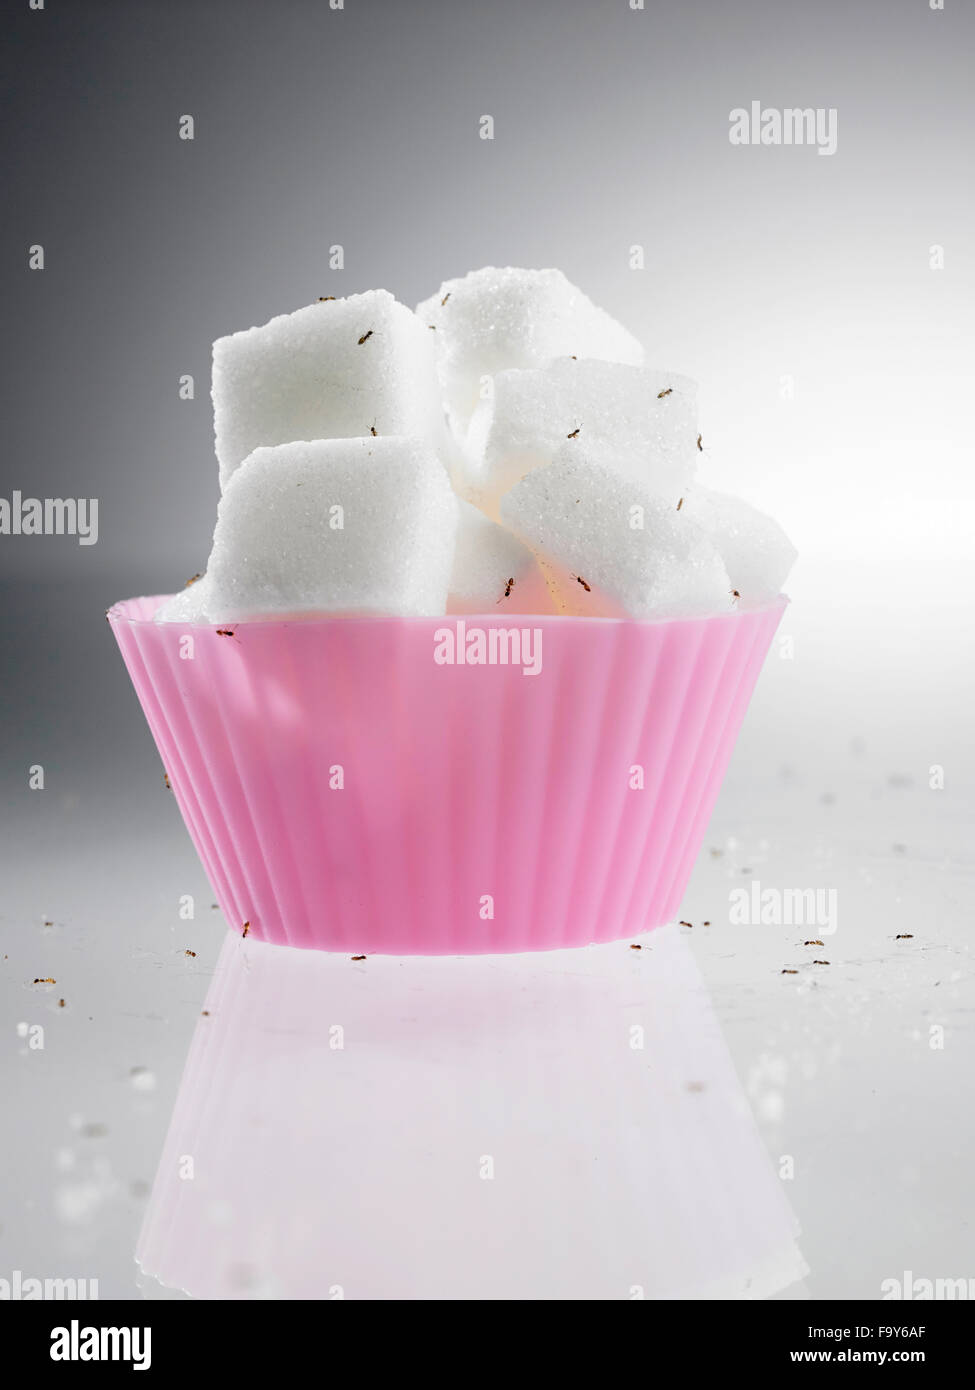 https://c8.alamy.com/comp/F9Y6AF/cube-sugar-in-cup-cake-mold-surrounded-with-ants-F9Y6AF.jpg